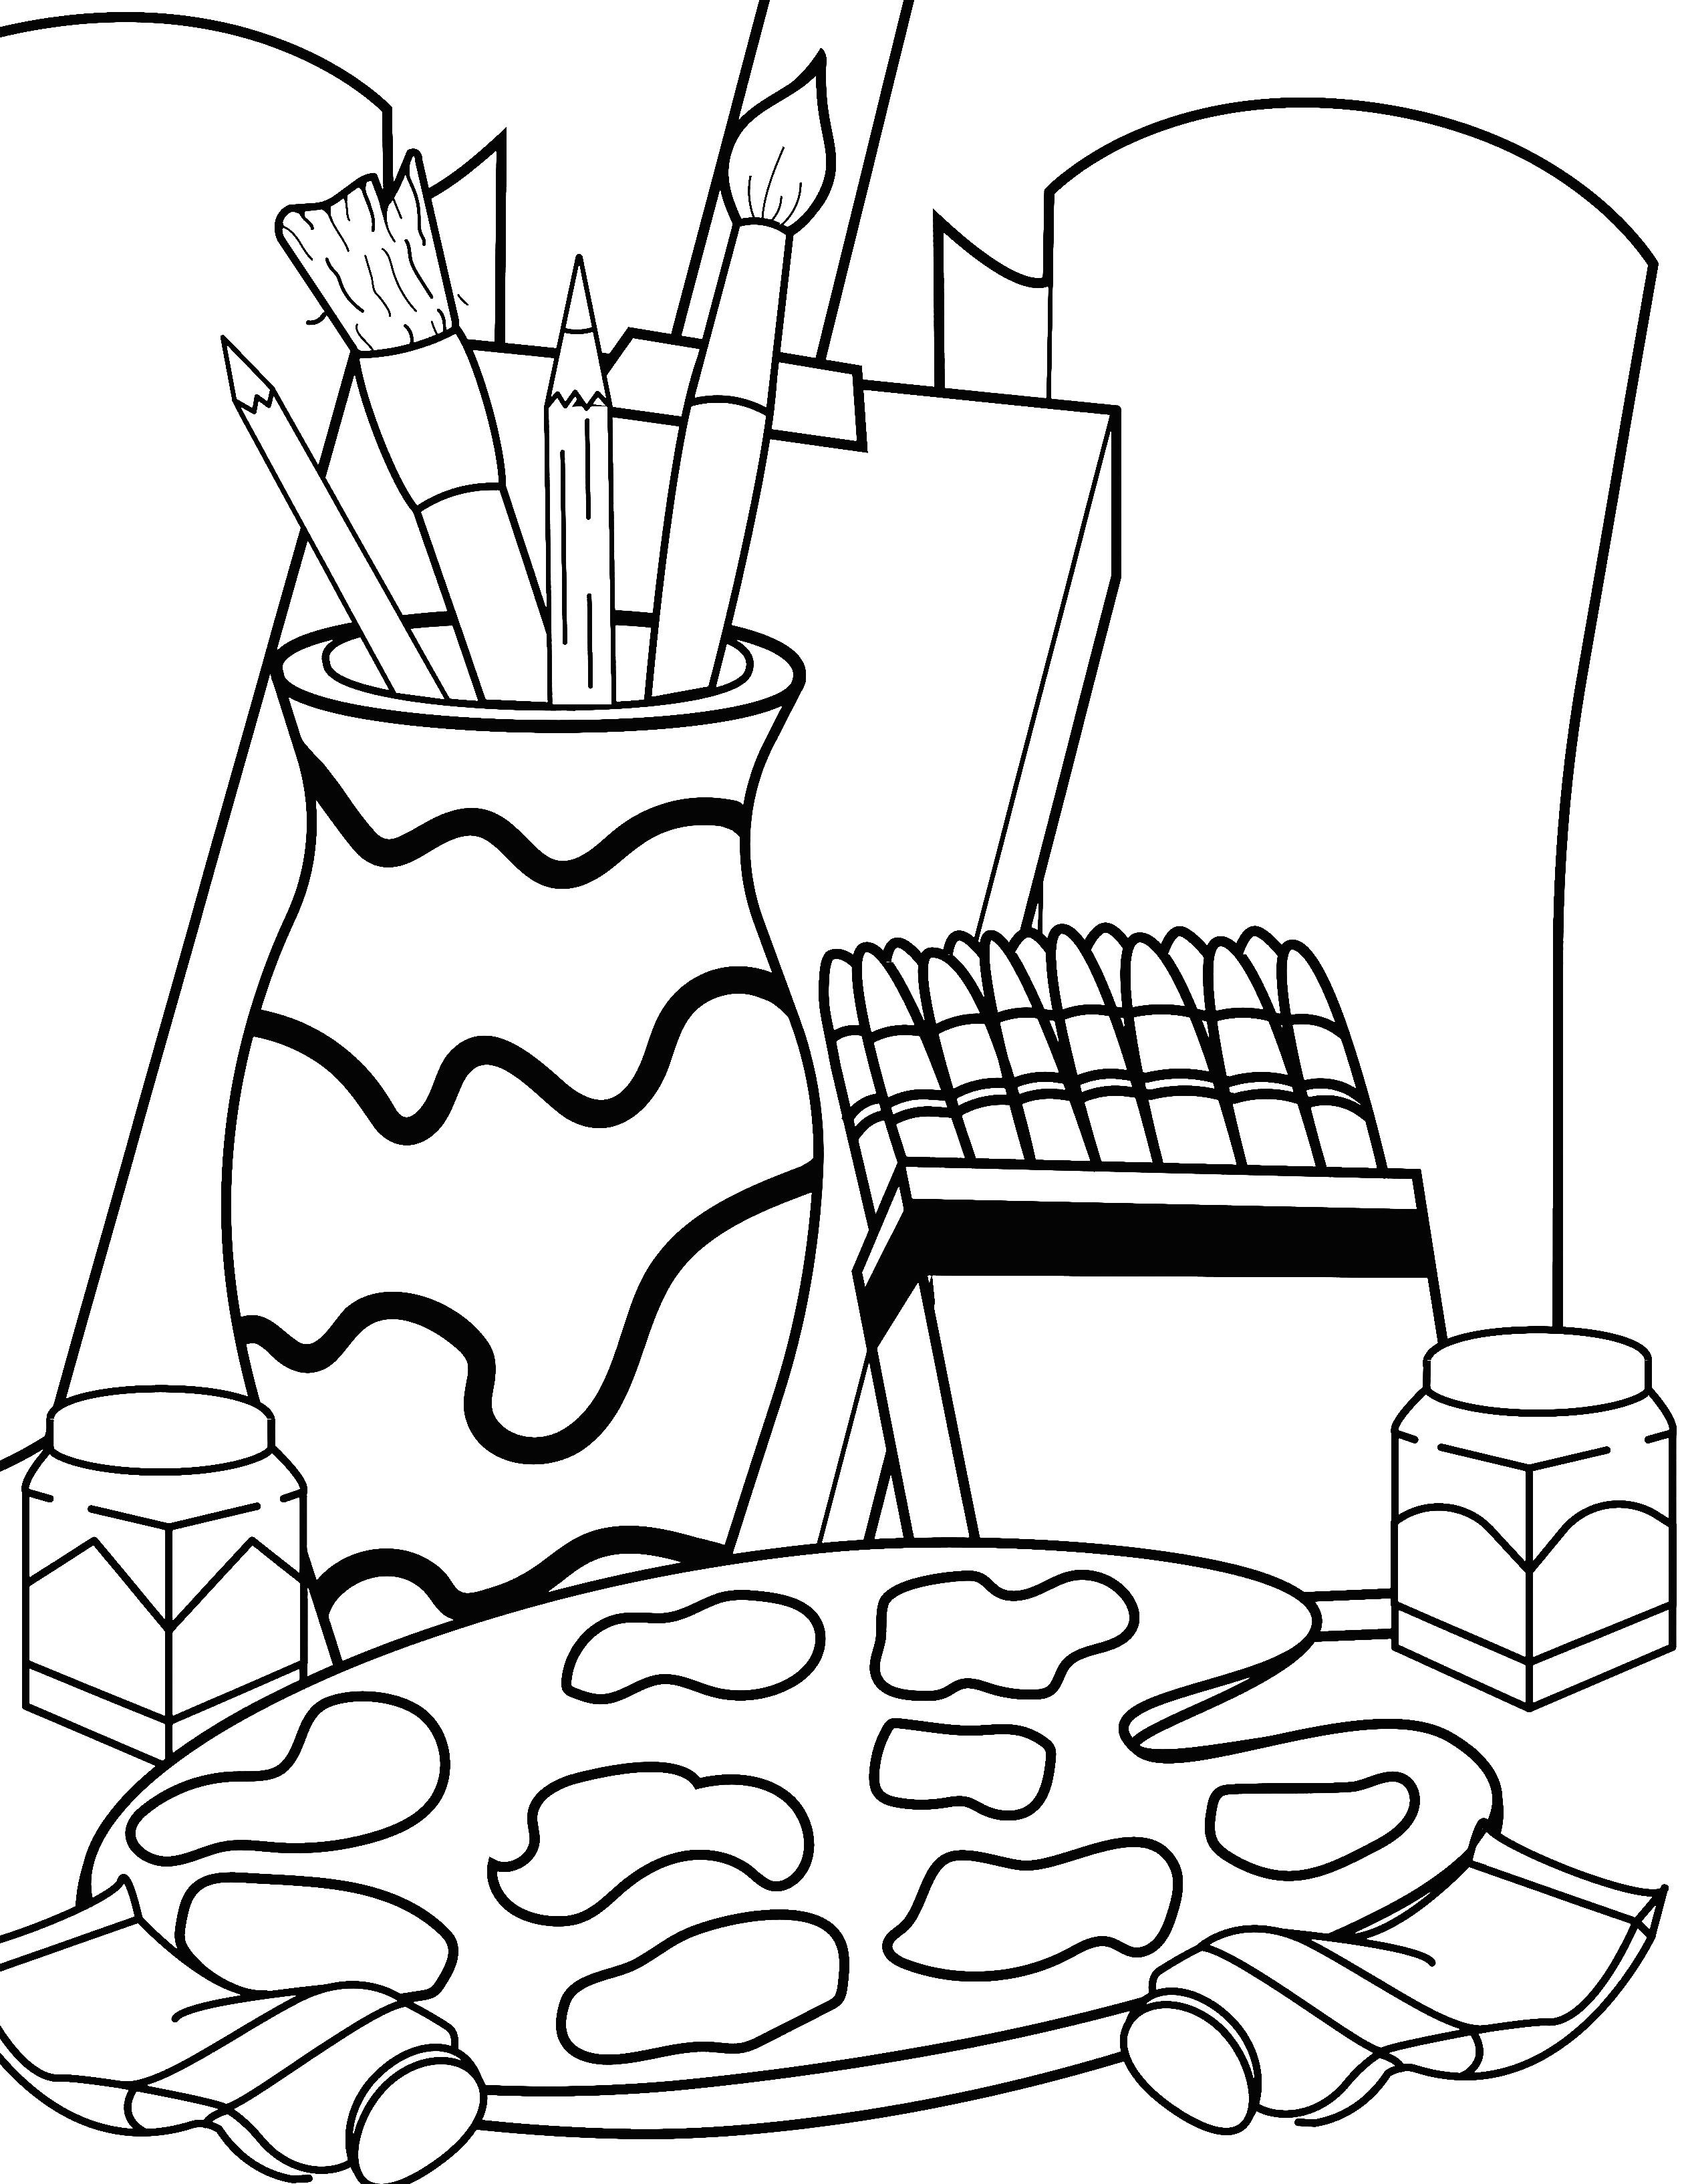 Kitchen, Sewing and Art Supply Coloring Pages